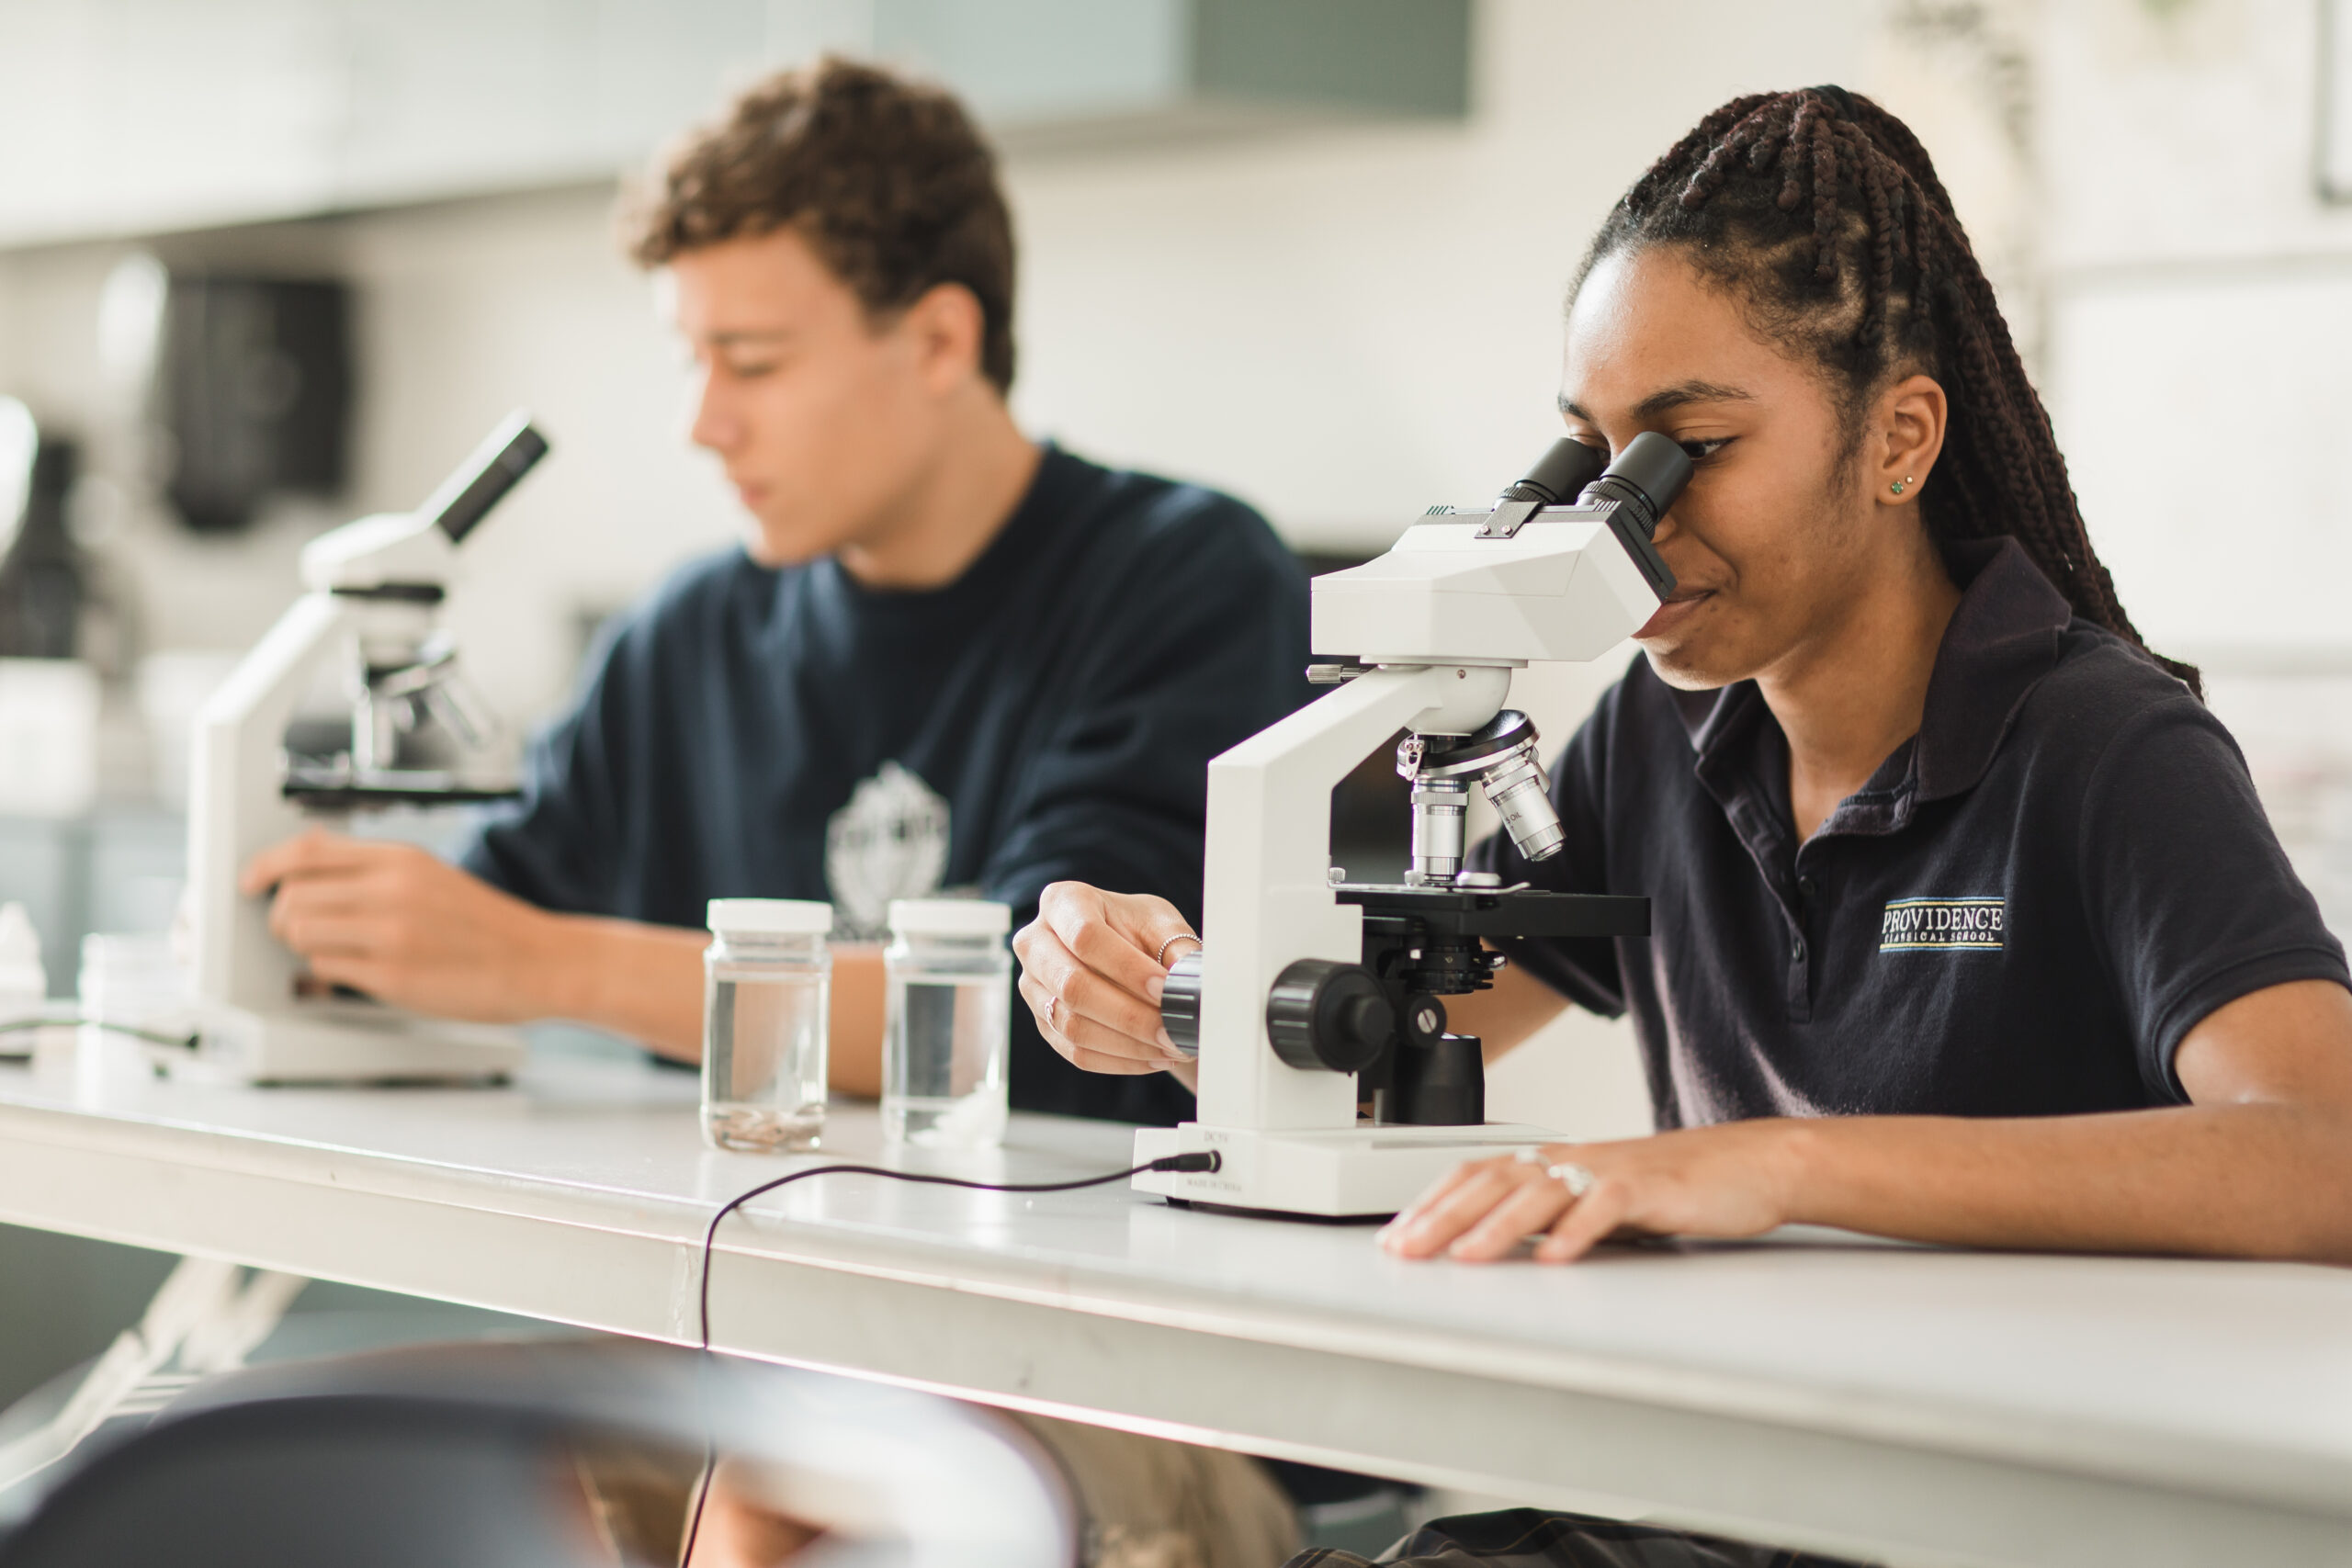 Ecology students at Providence Classical School in Spring, TX look through microscopes at specimens collected from the school pond.